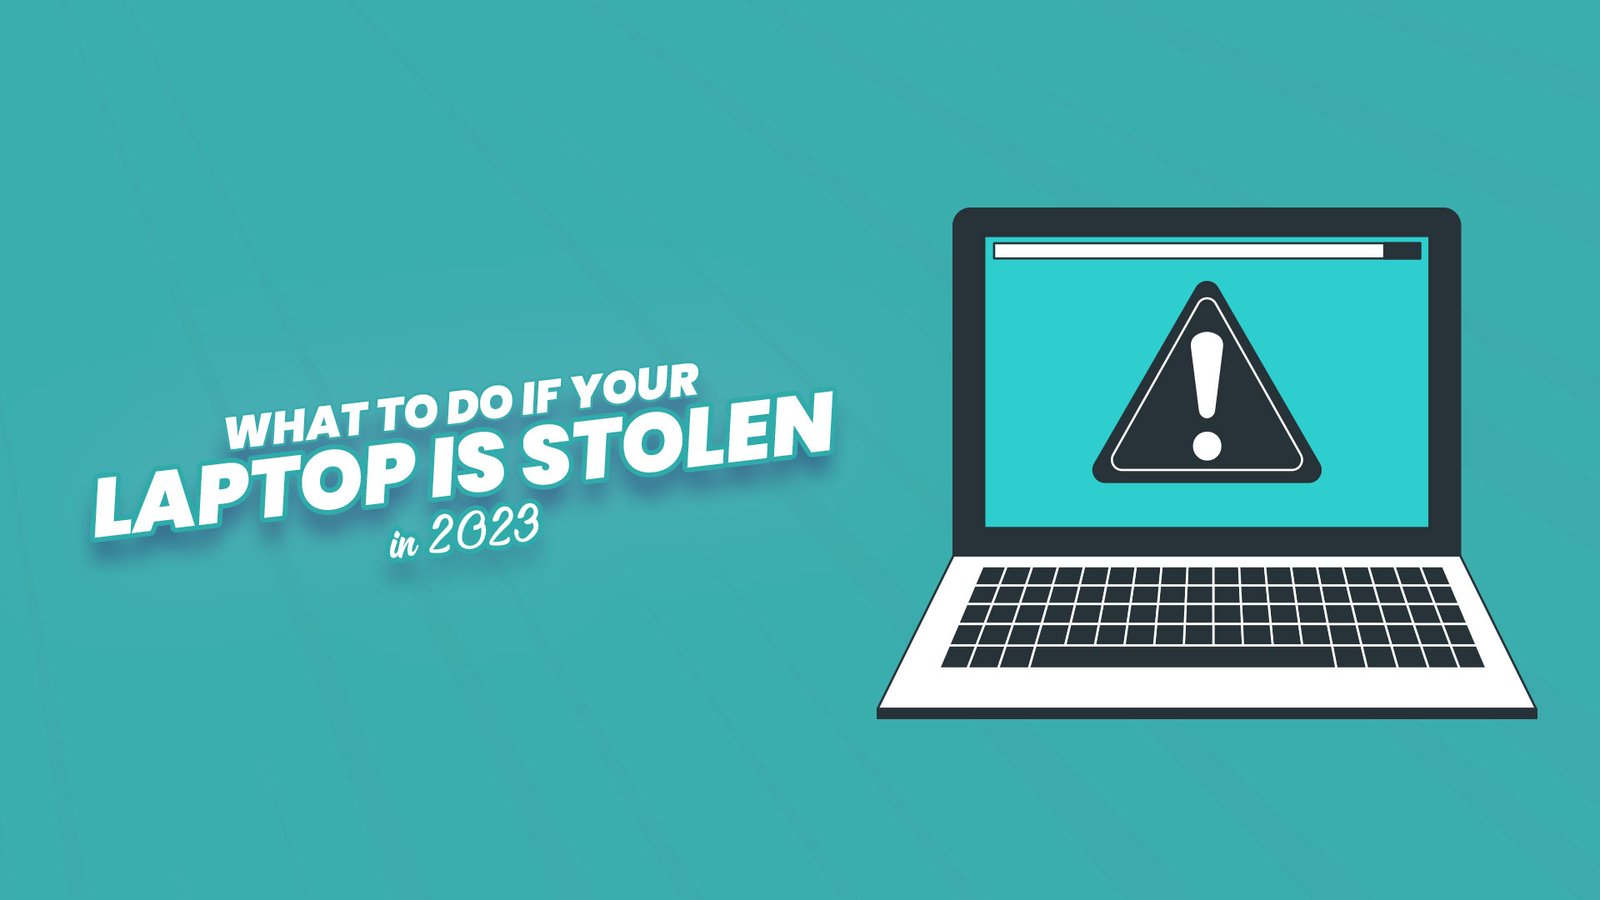 If Your Laptop Is Stolen